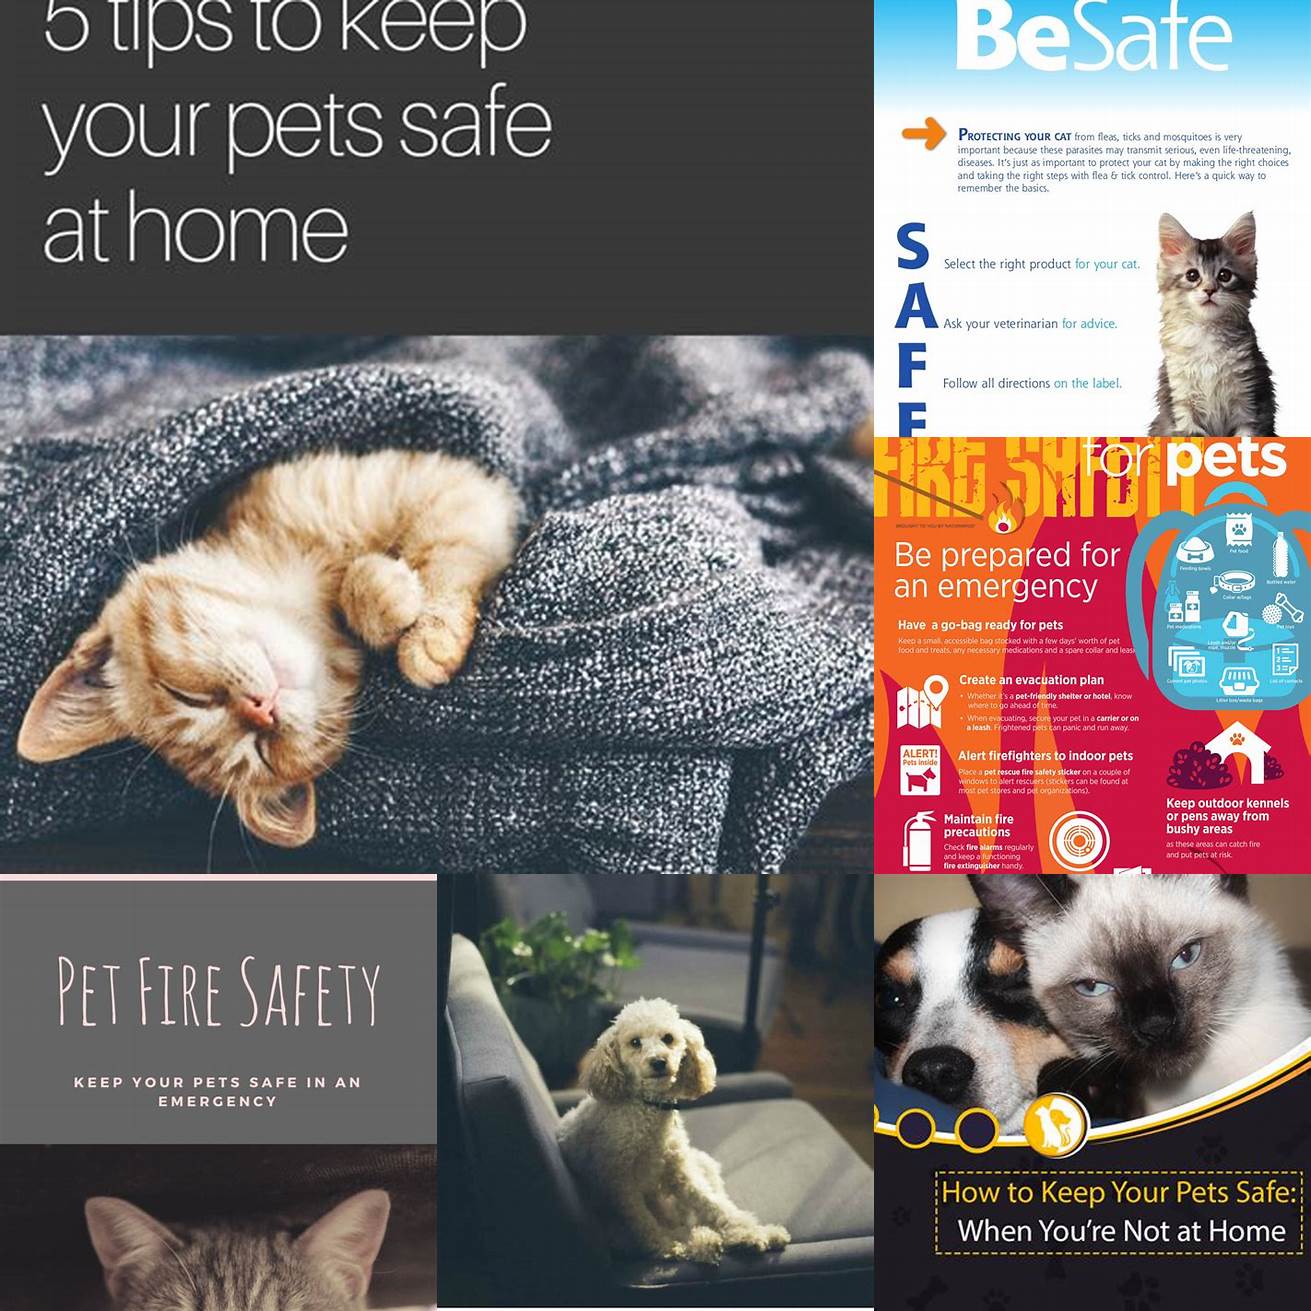 Ensure your pets safety